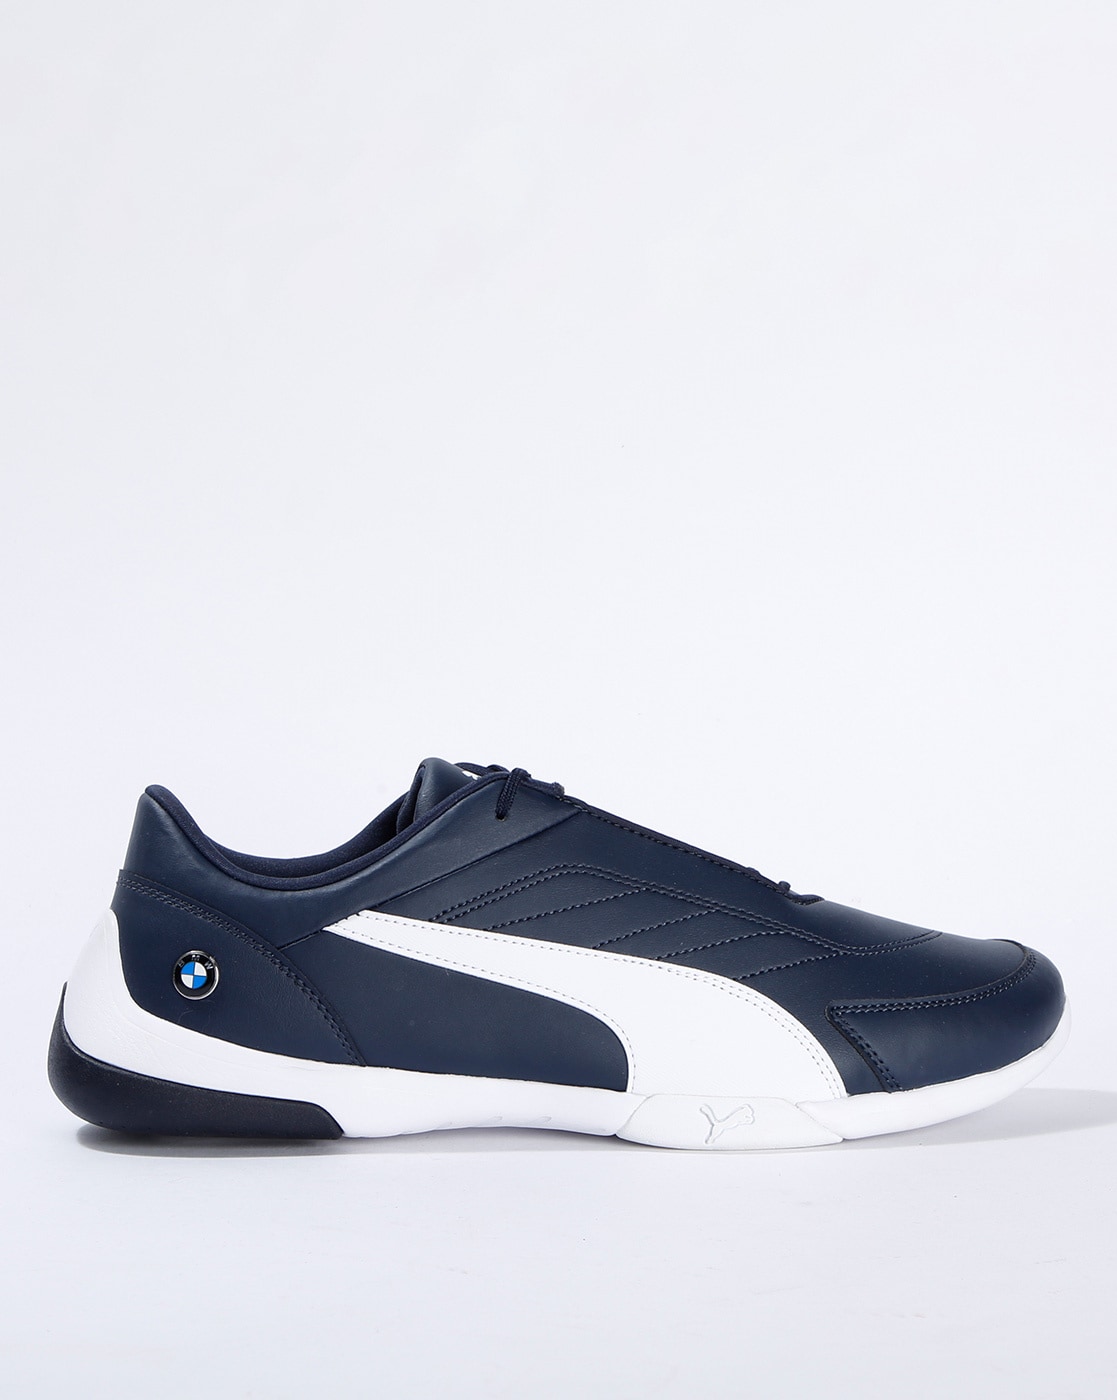 bmw shoes buy online